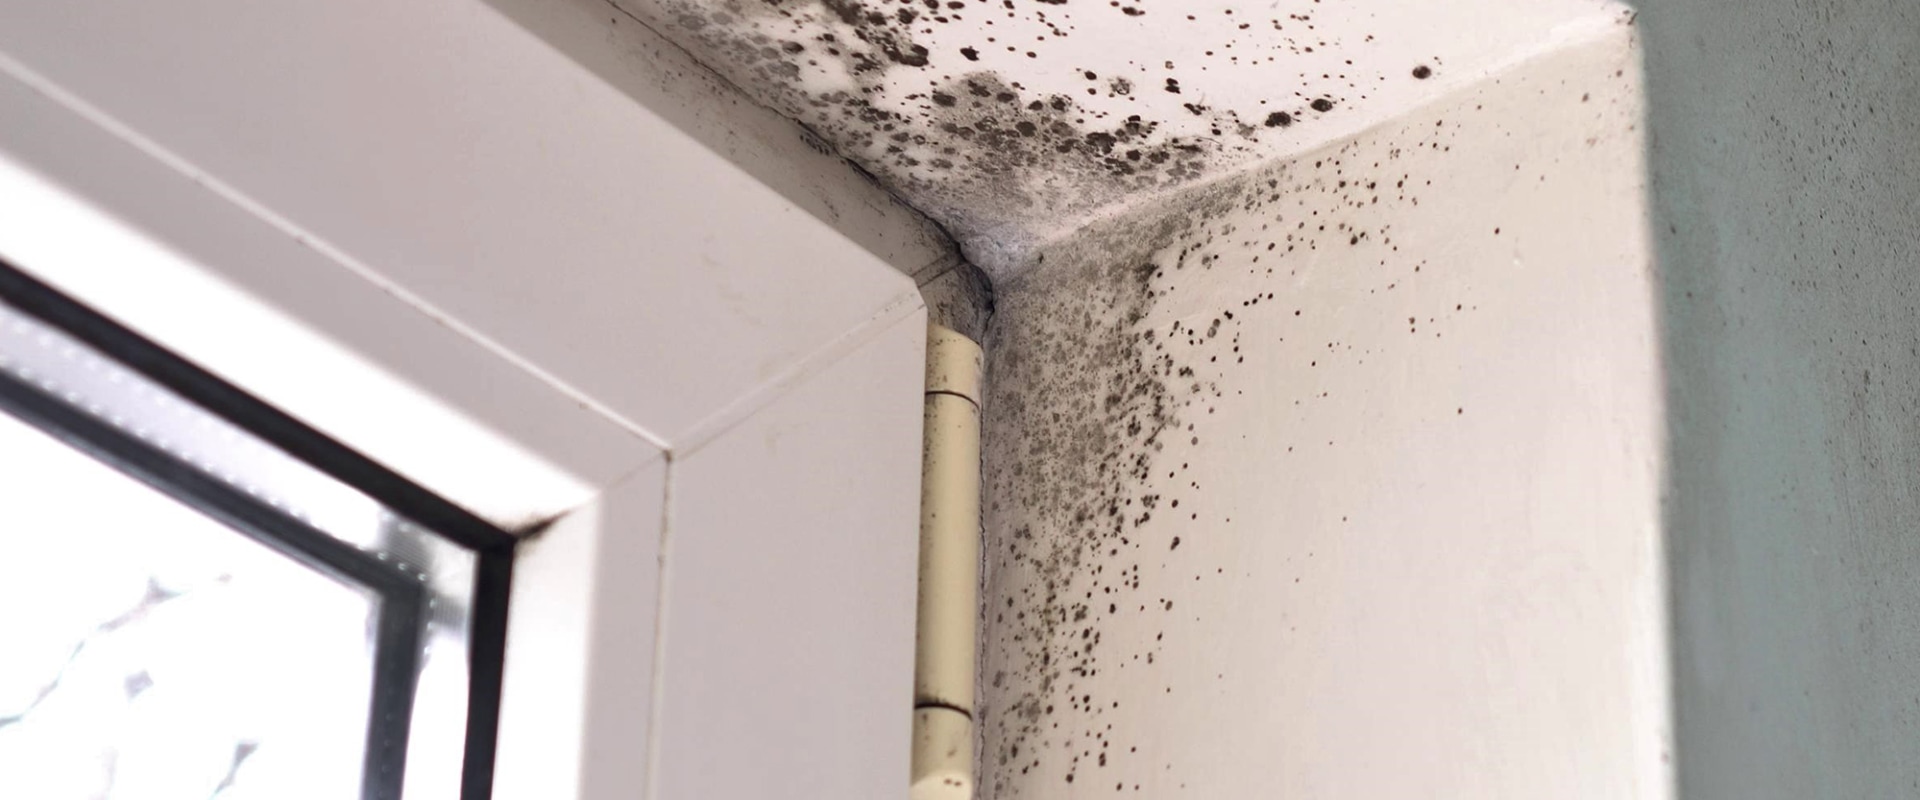 How to Tell if Mold Remediation is Effective